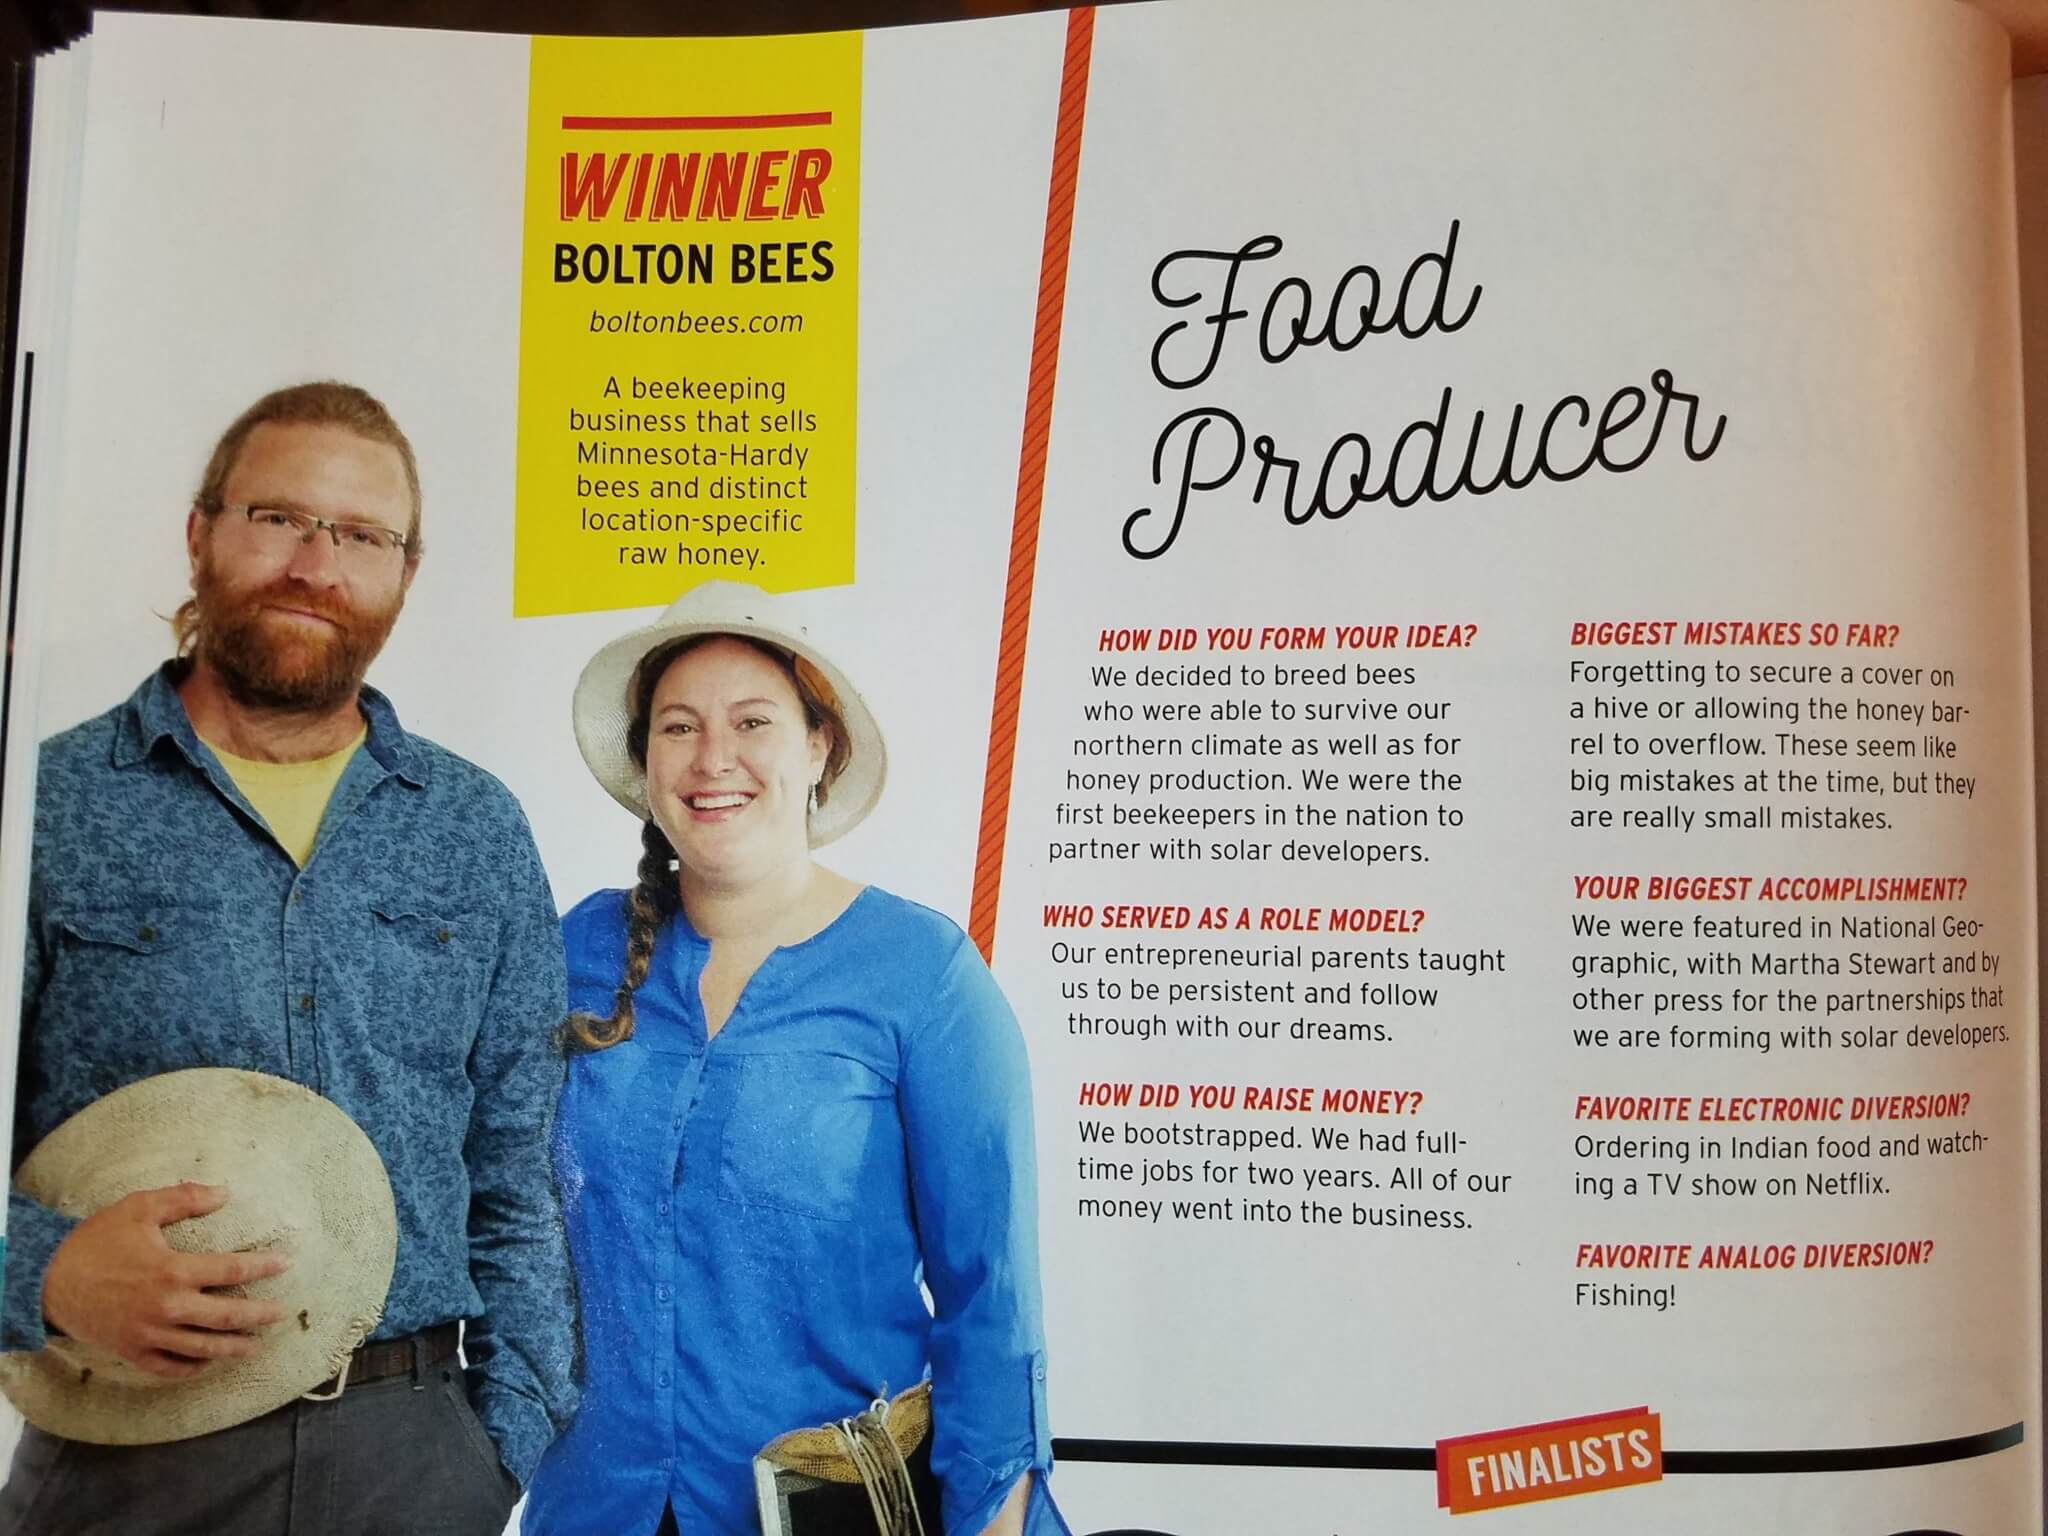 bolton bees won Food Producer 2017 in Minnesota Business Magazine